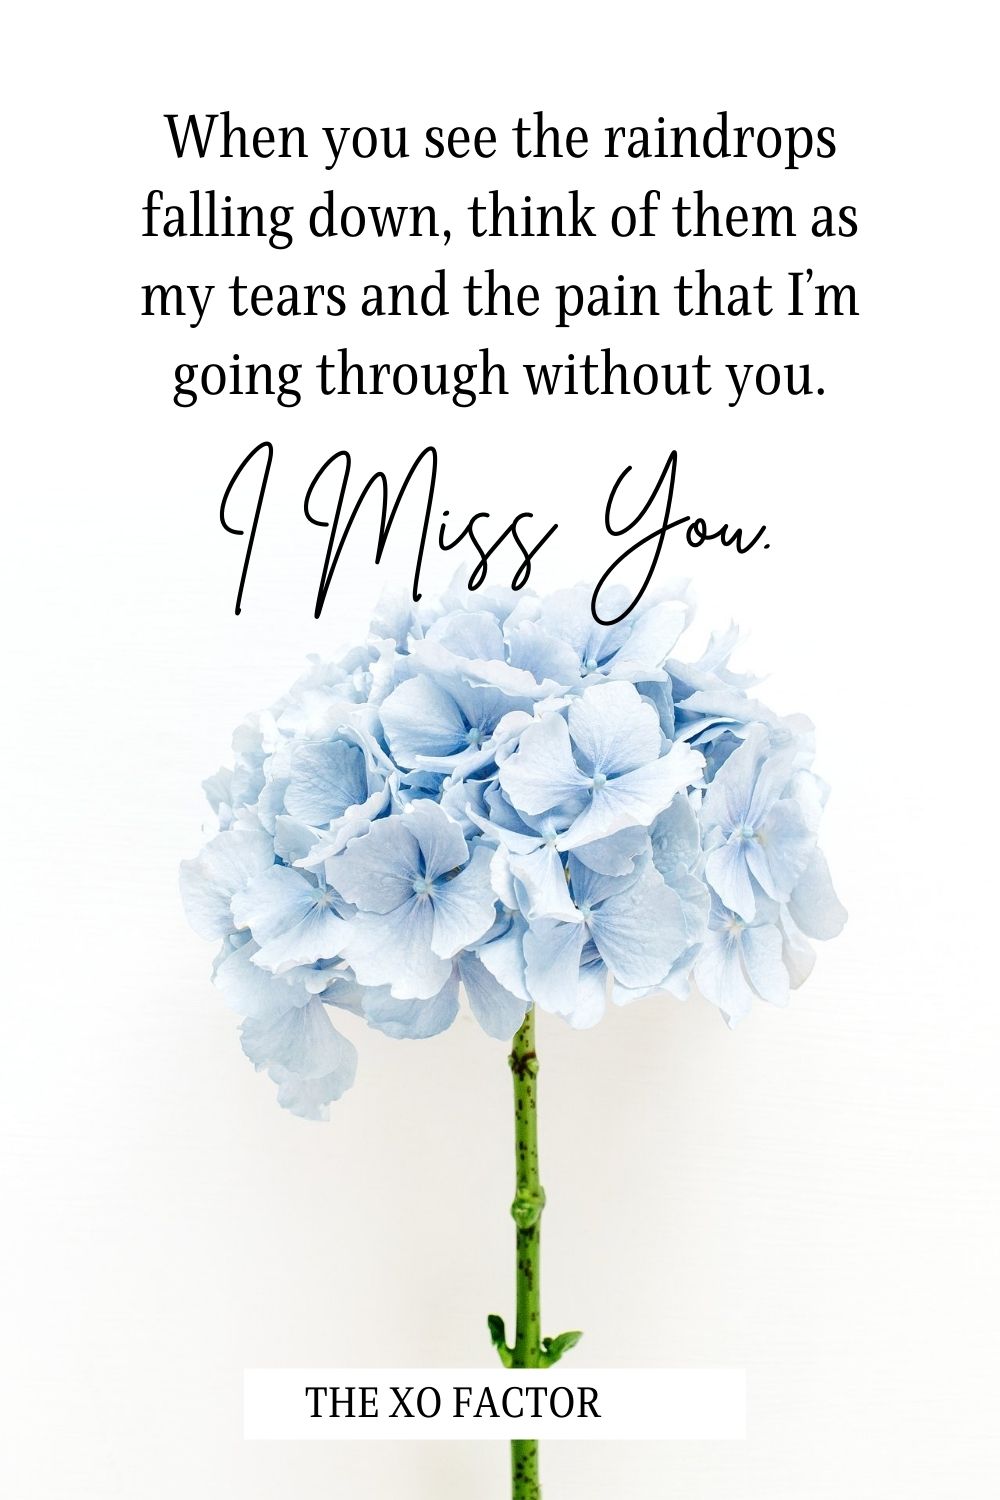 When you see the raindrops falling down, think of them as my tears and the pain that I’m going through without you. I Miss You.